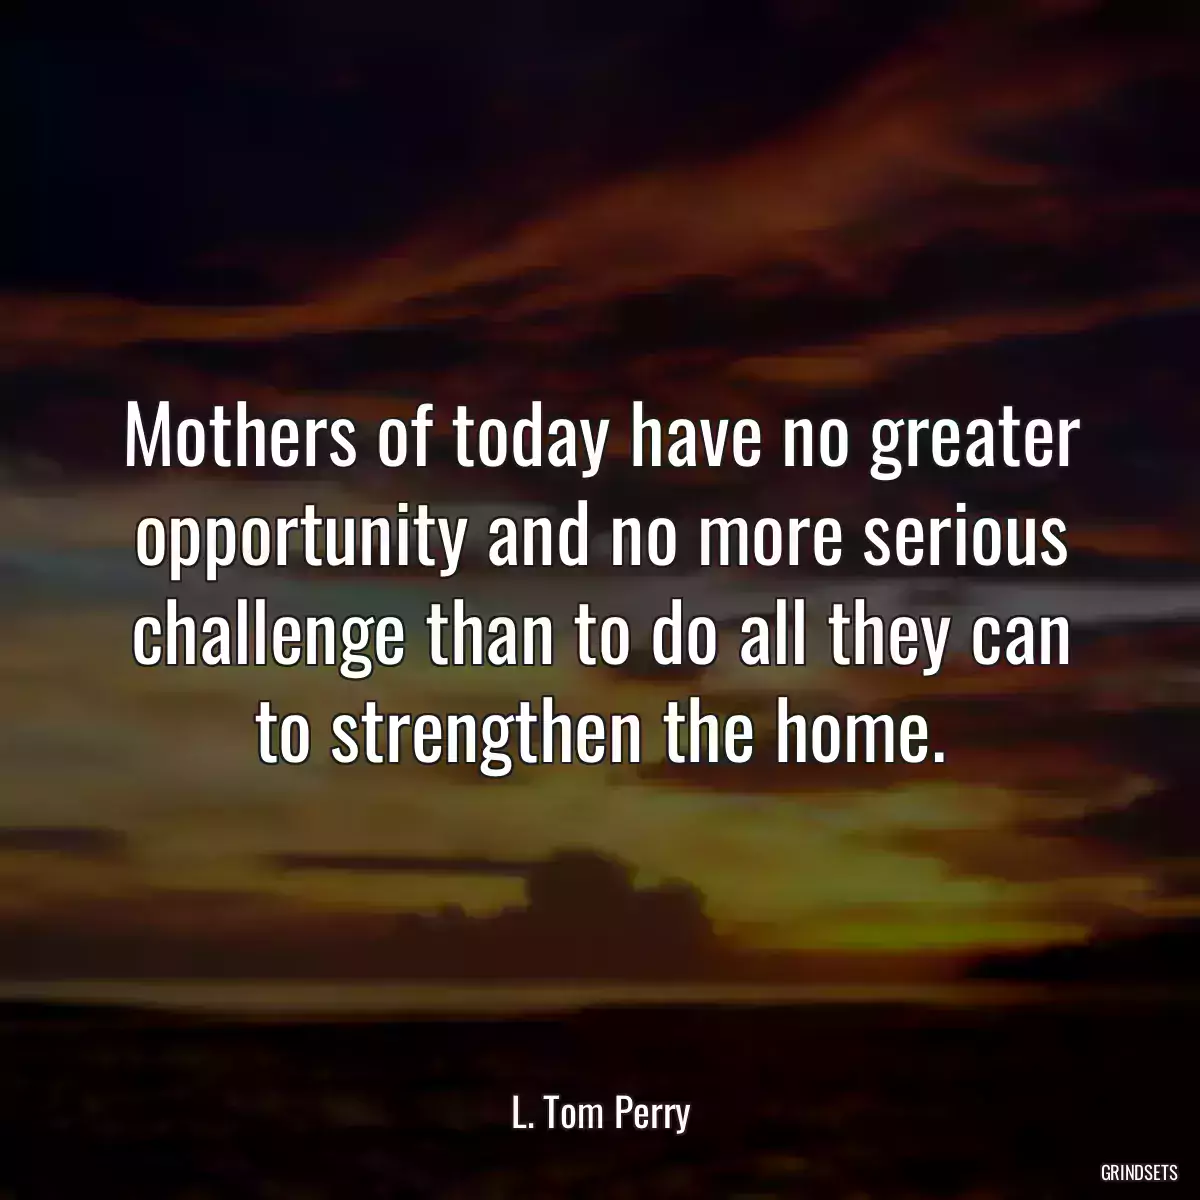 Mothers of today have no greater opportunity and no more serious challenge than to do all they can to strengthen the home.